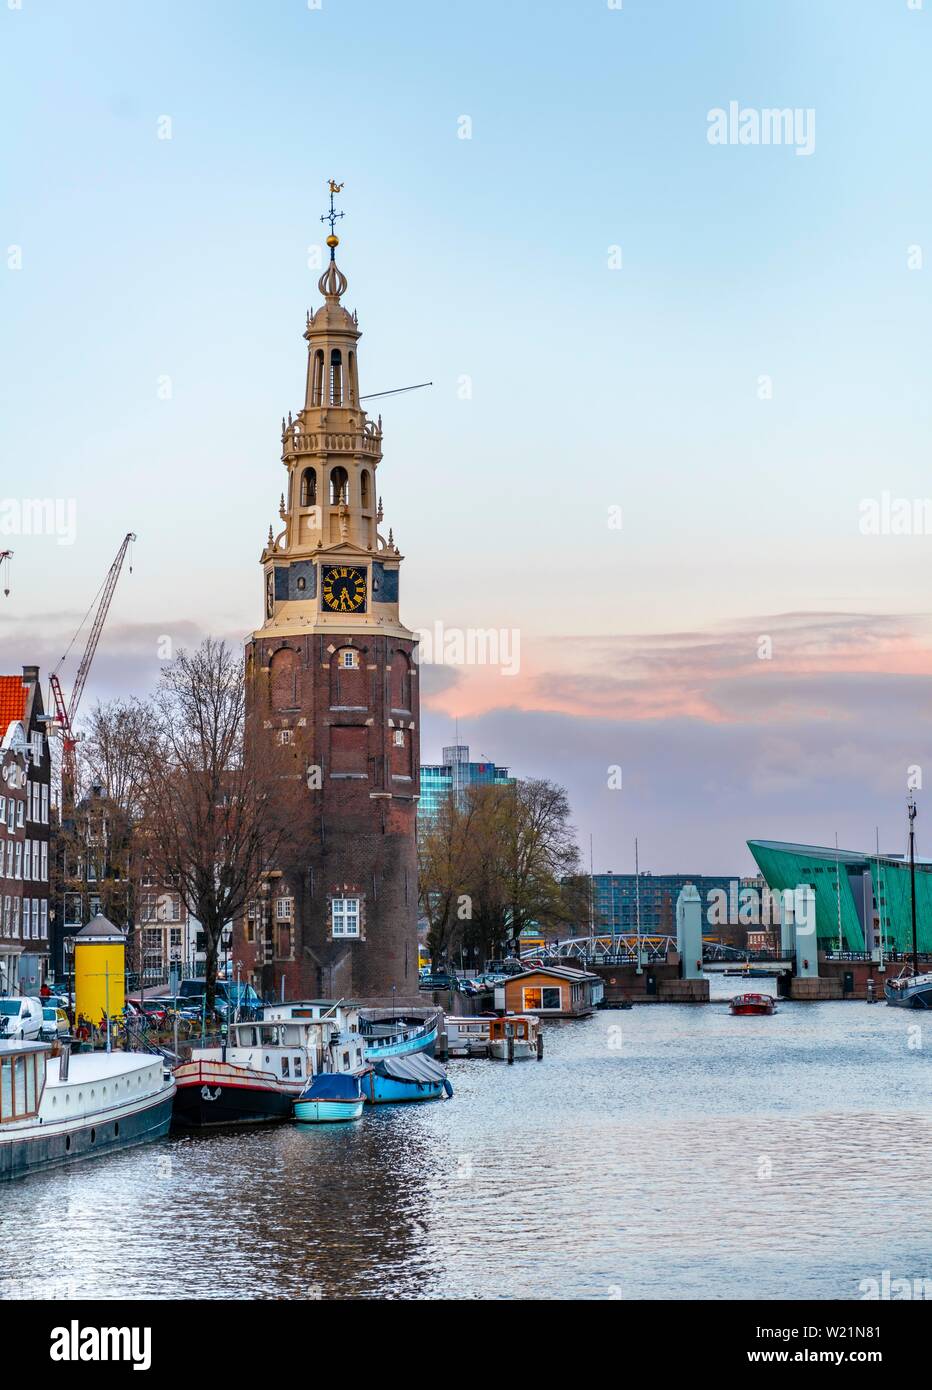 Old tower, Montelbaanstoren, Oudeschans, canal with boats, Amsterdam, North Holland, Netherlands Stock Photo